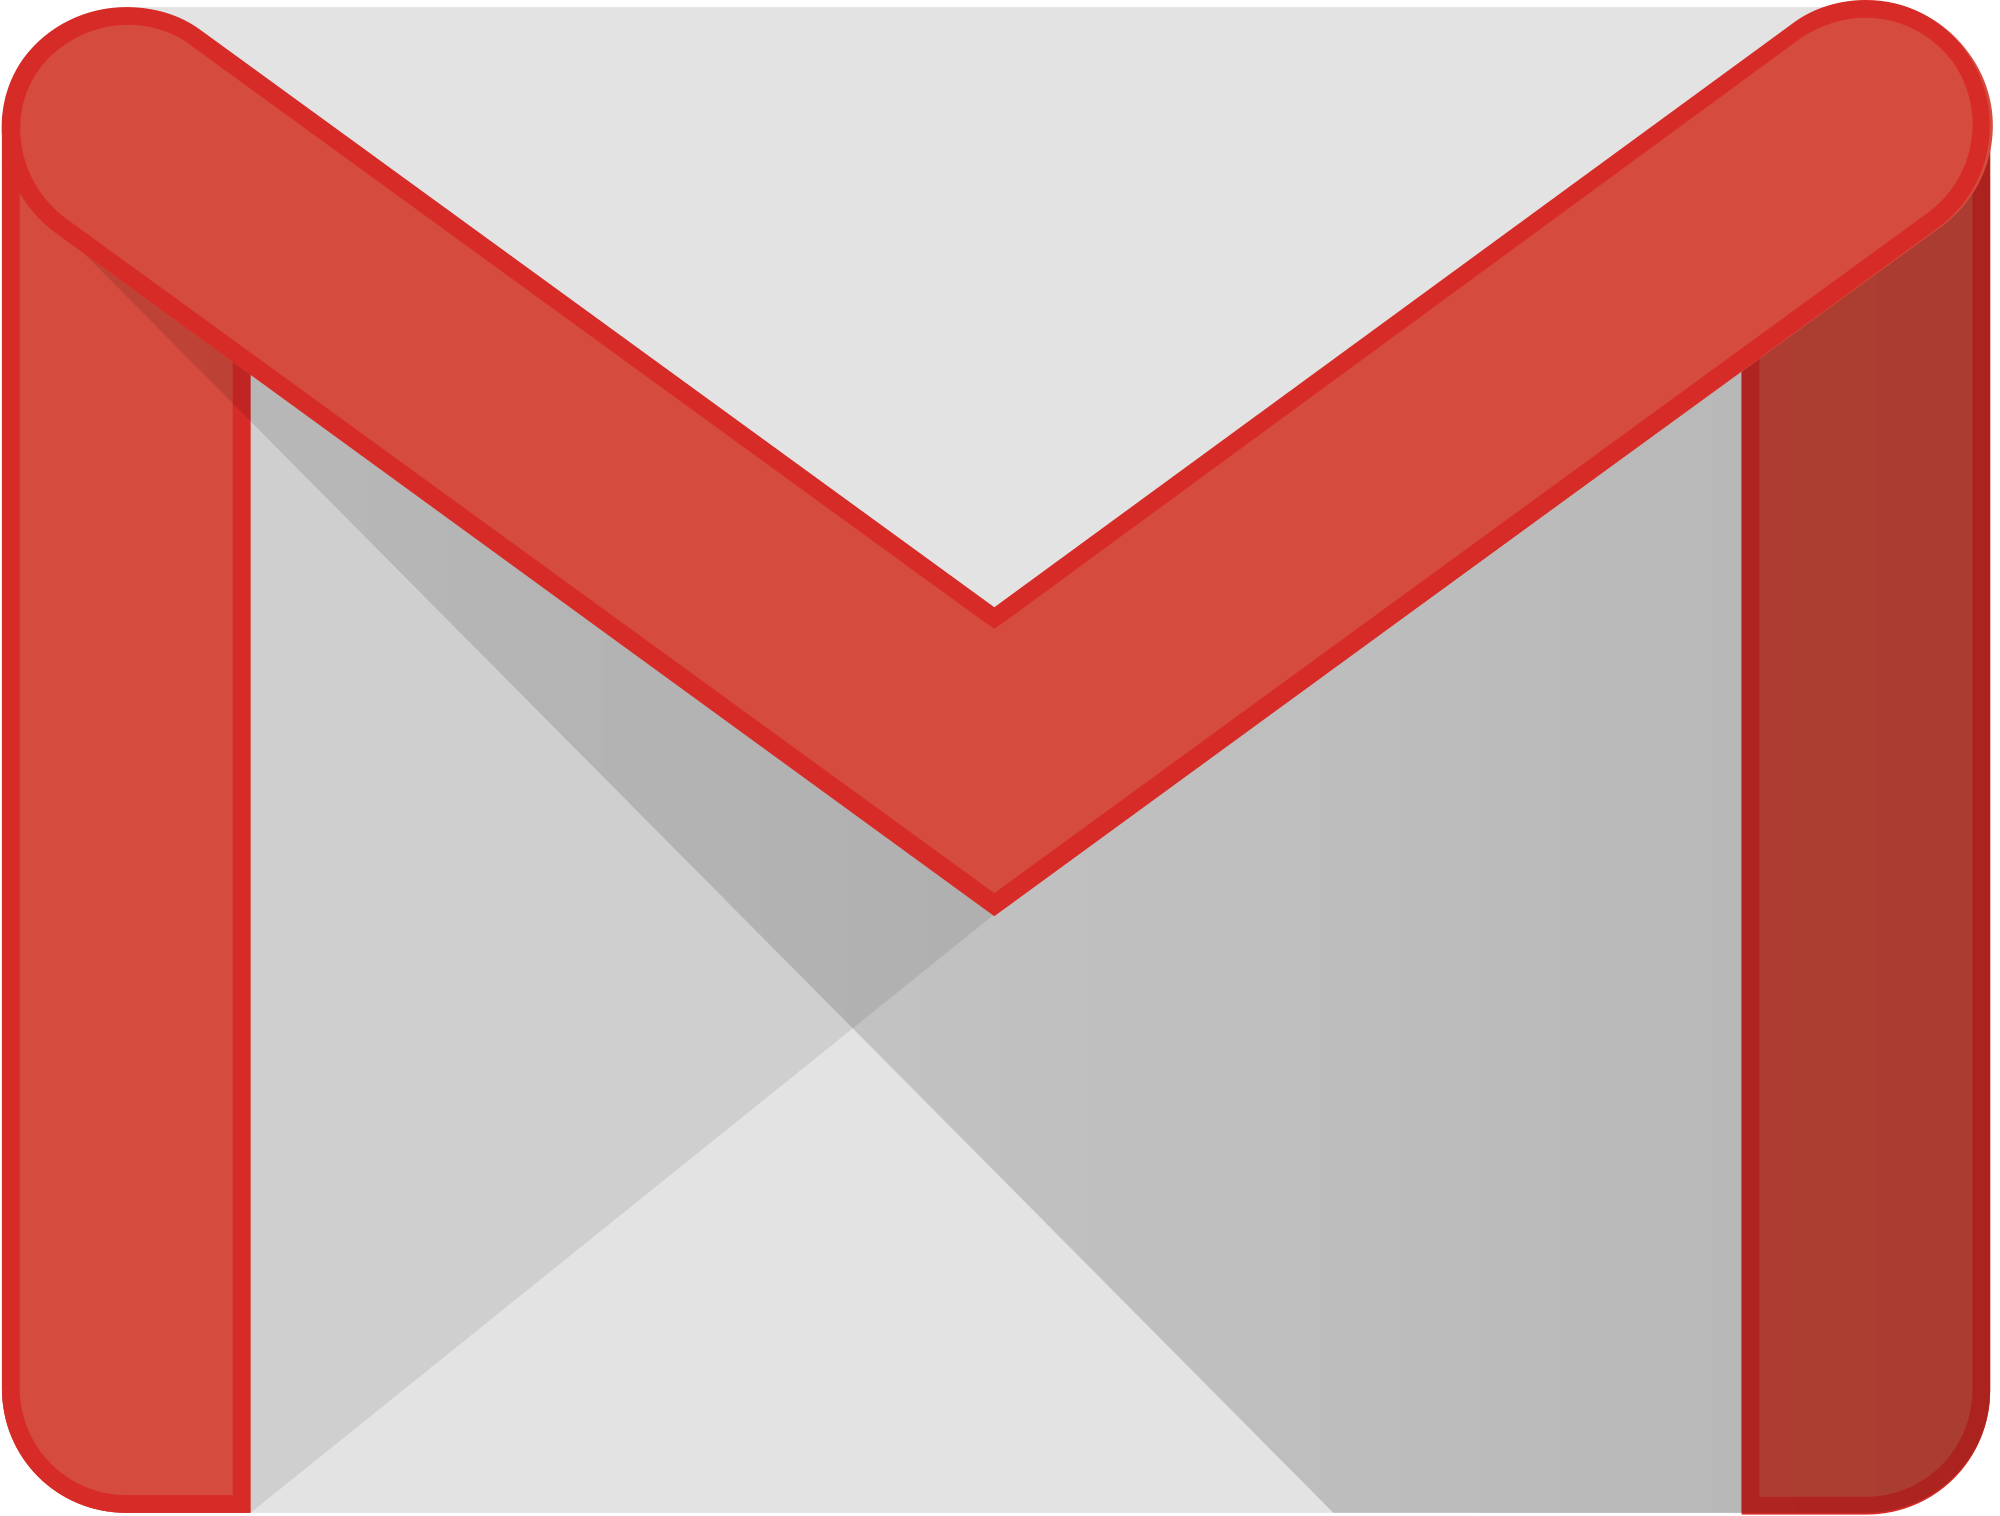 How to Compose and Send Your First Email With Gmail